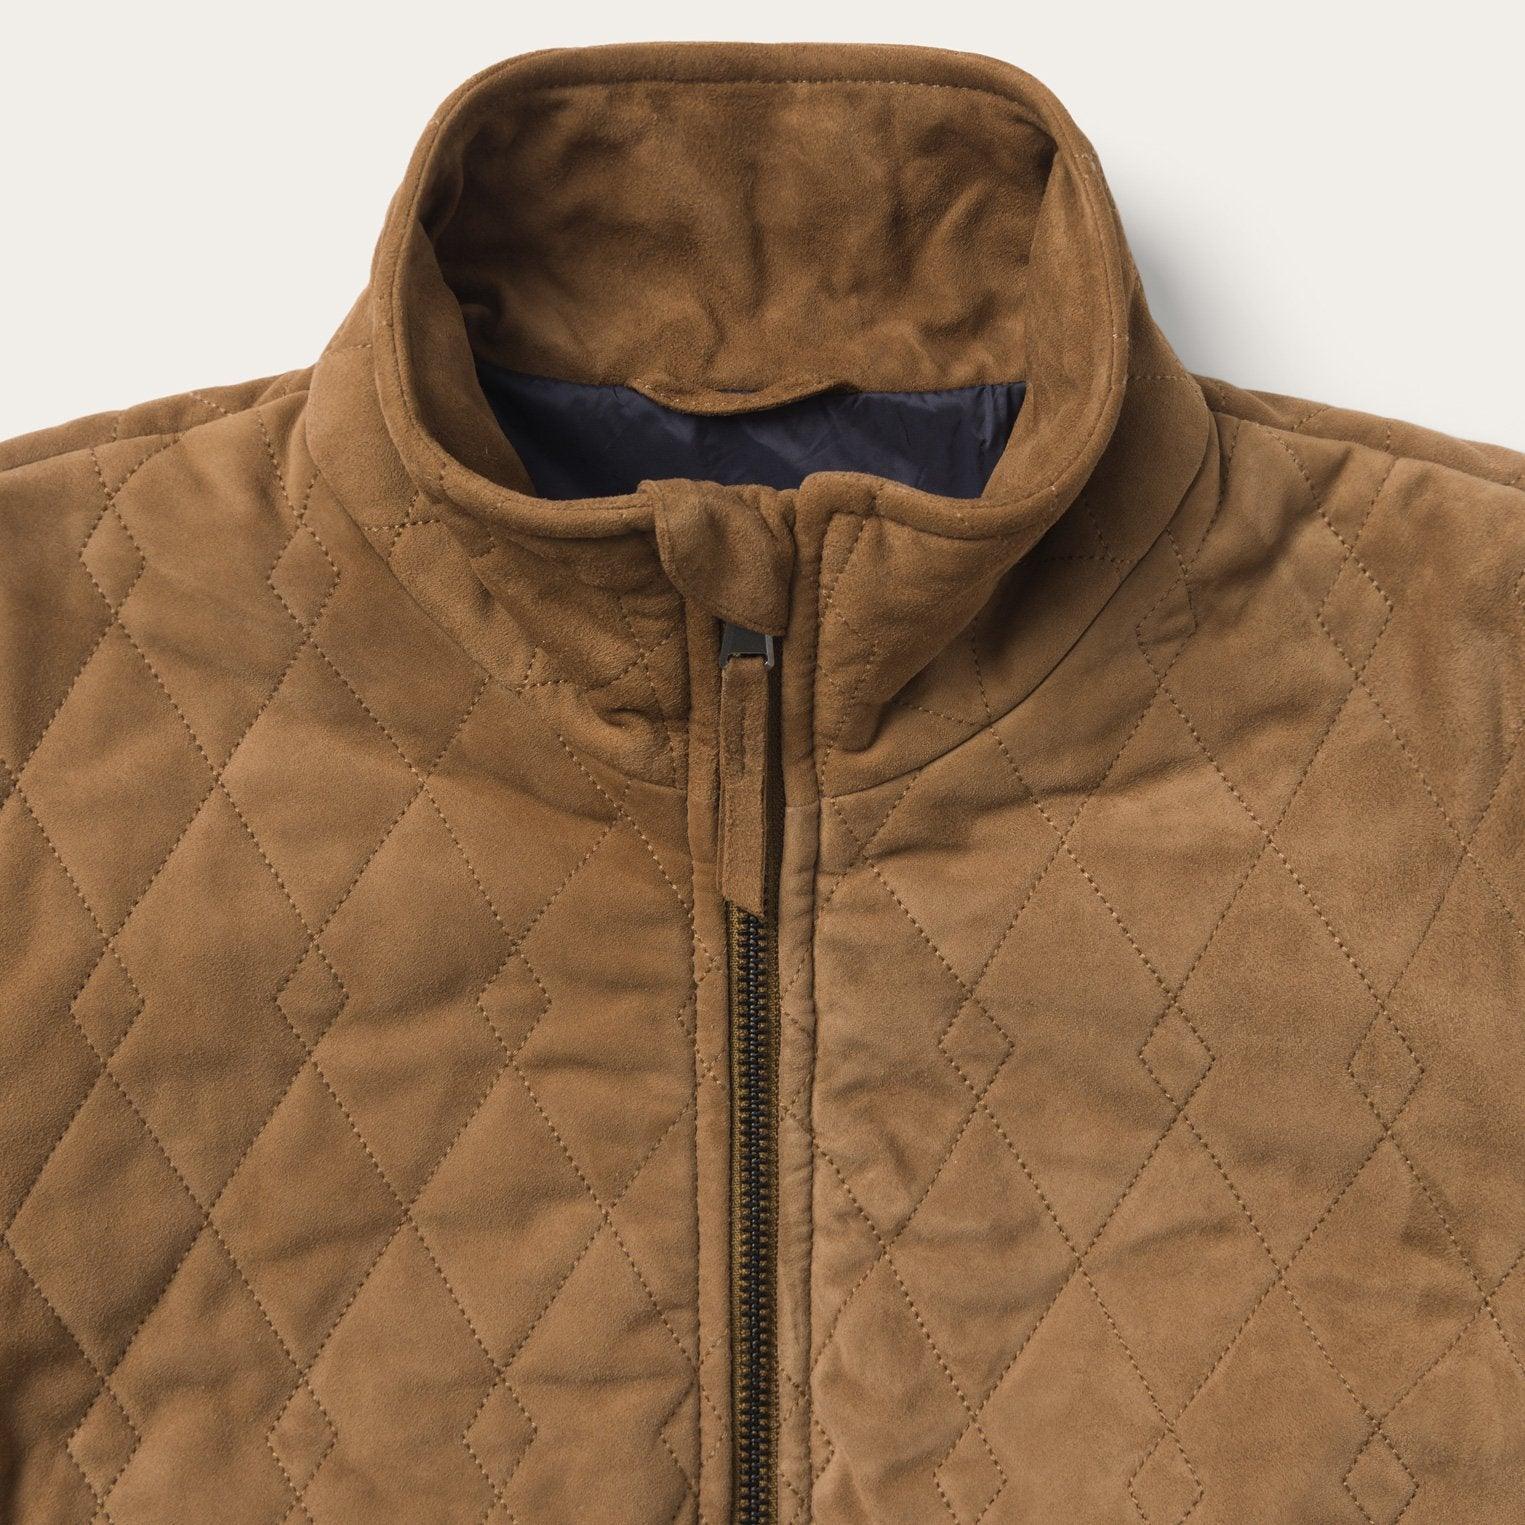 Stetson Diamond Quilted Suede Jacket